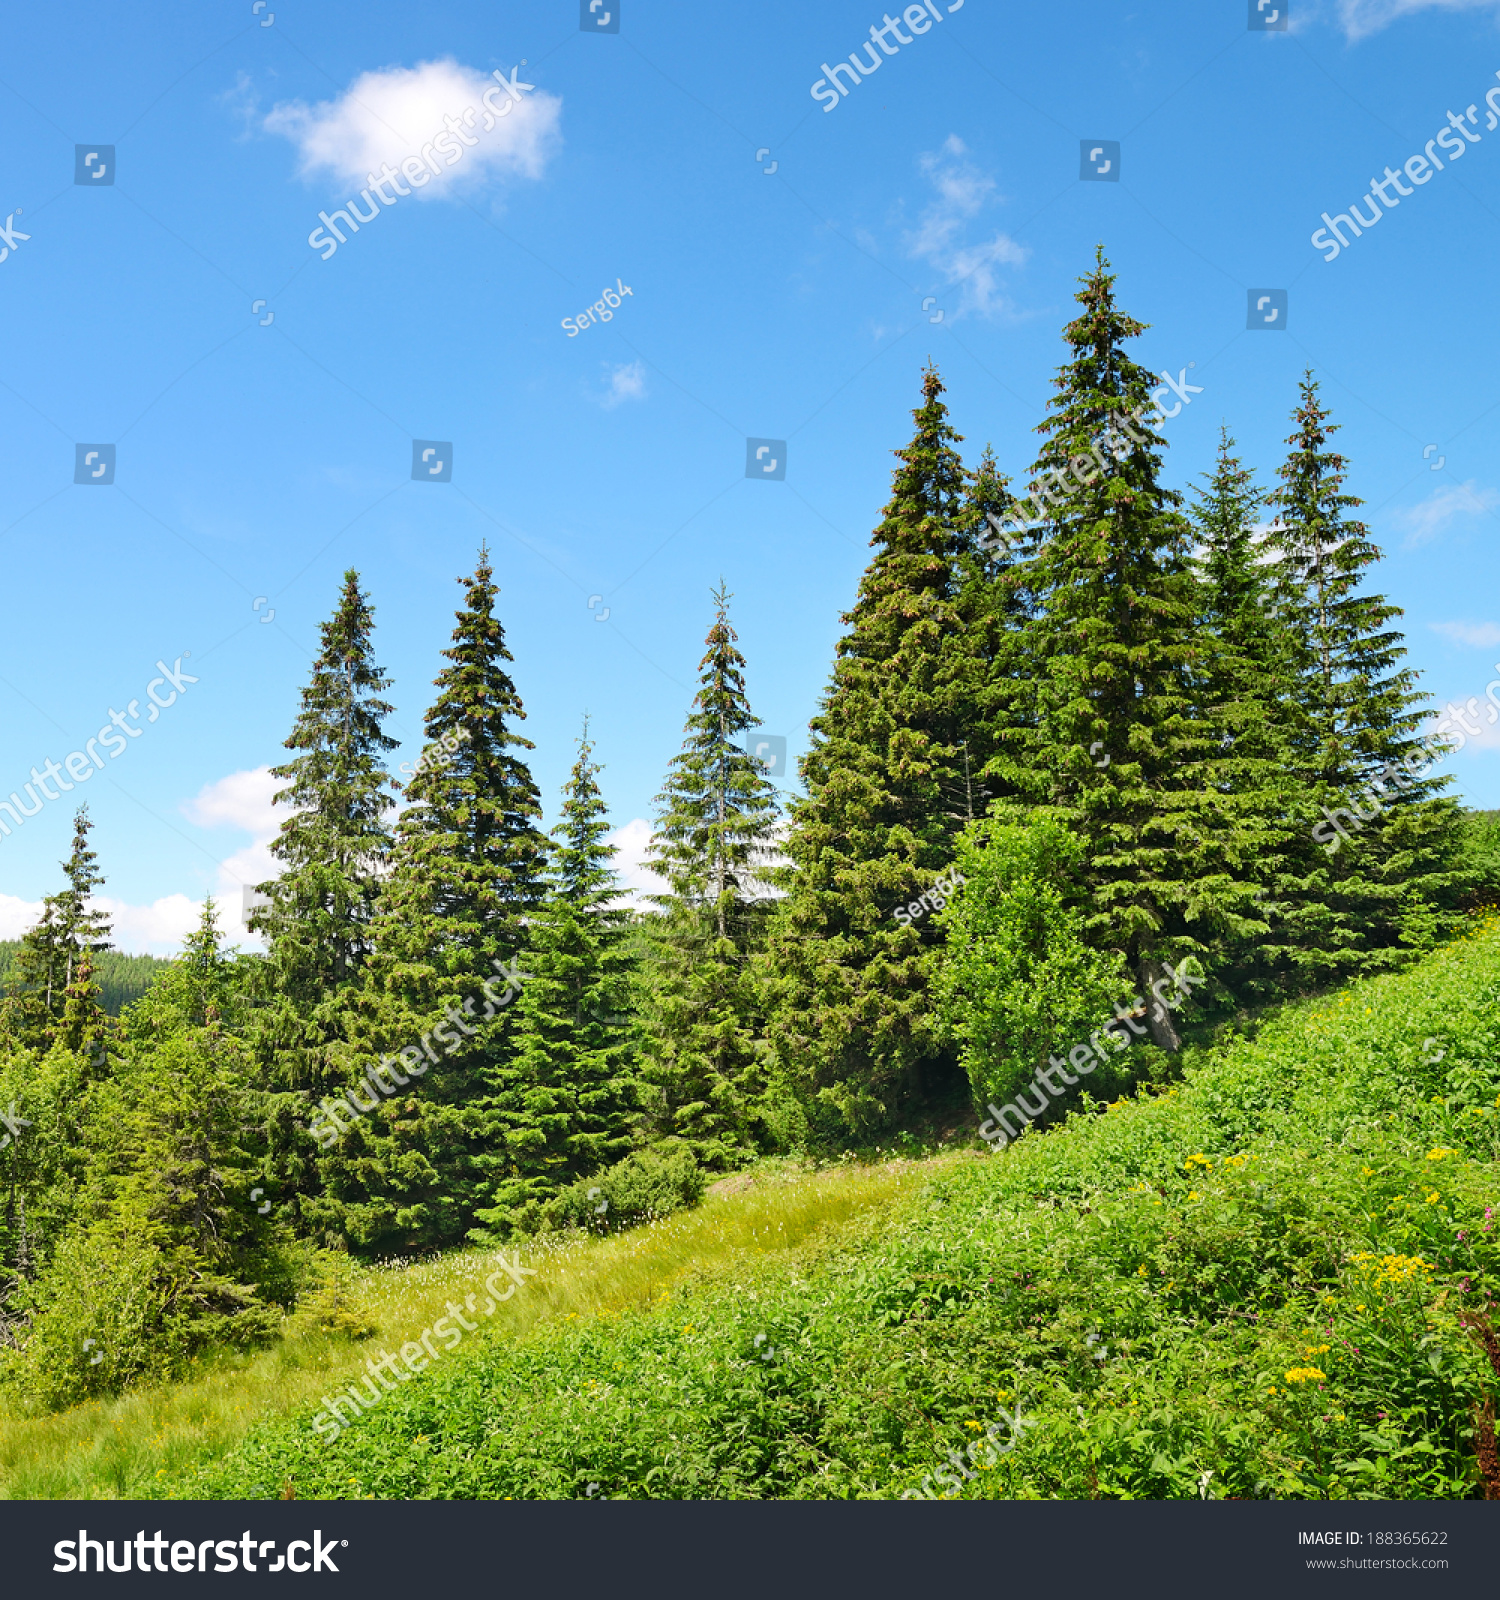 Beautiful pine trees in mountains.                                     #188365622